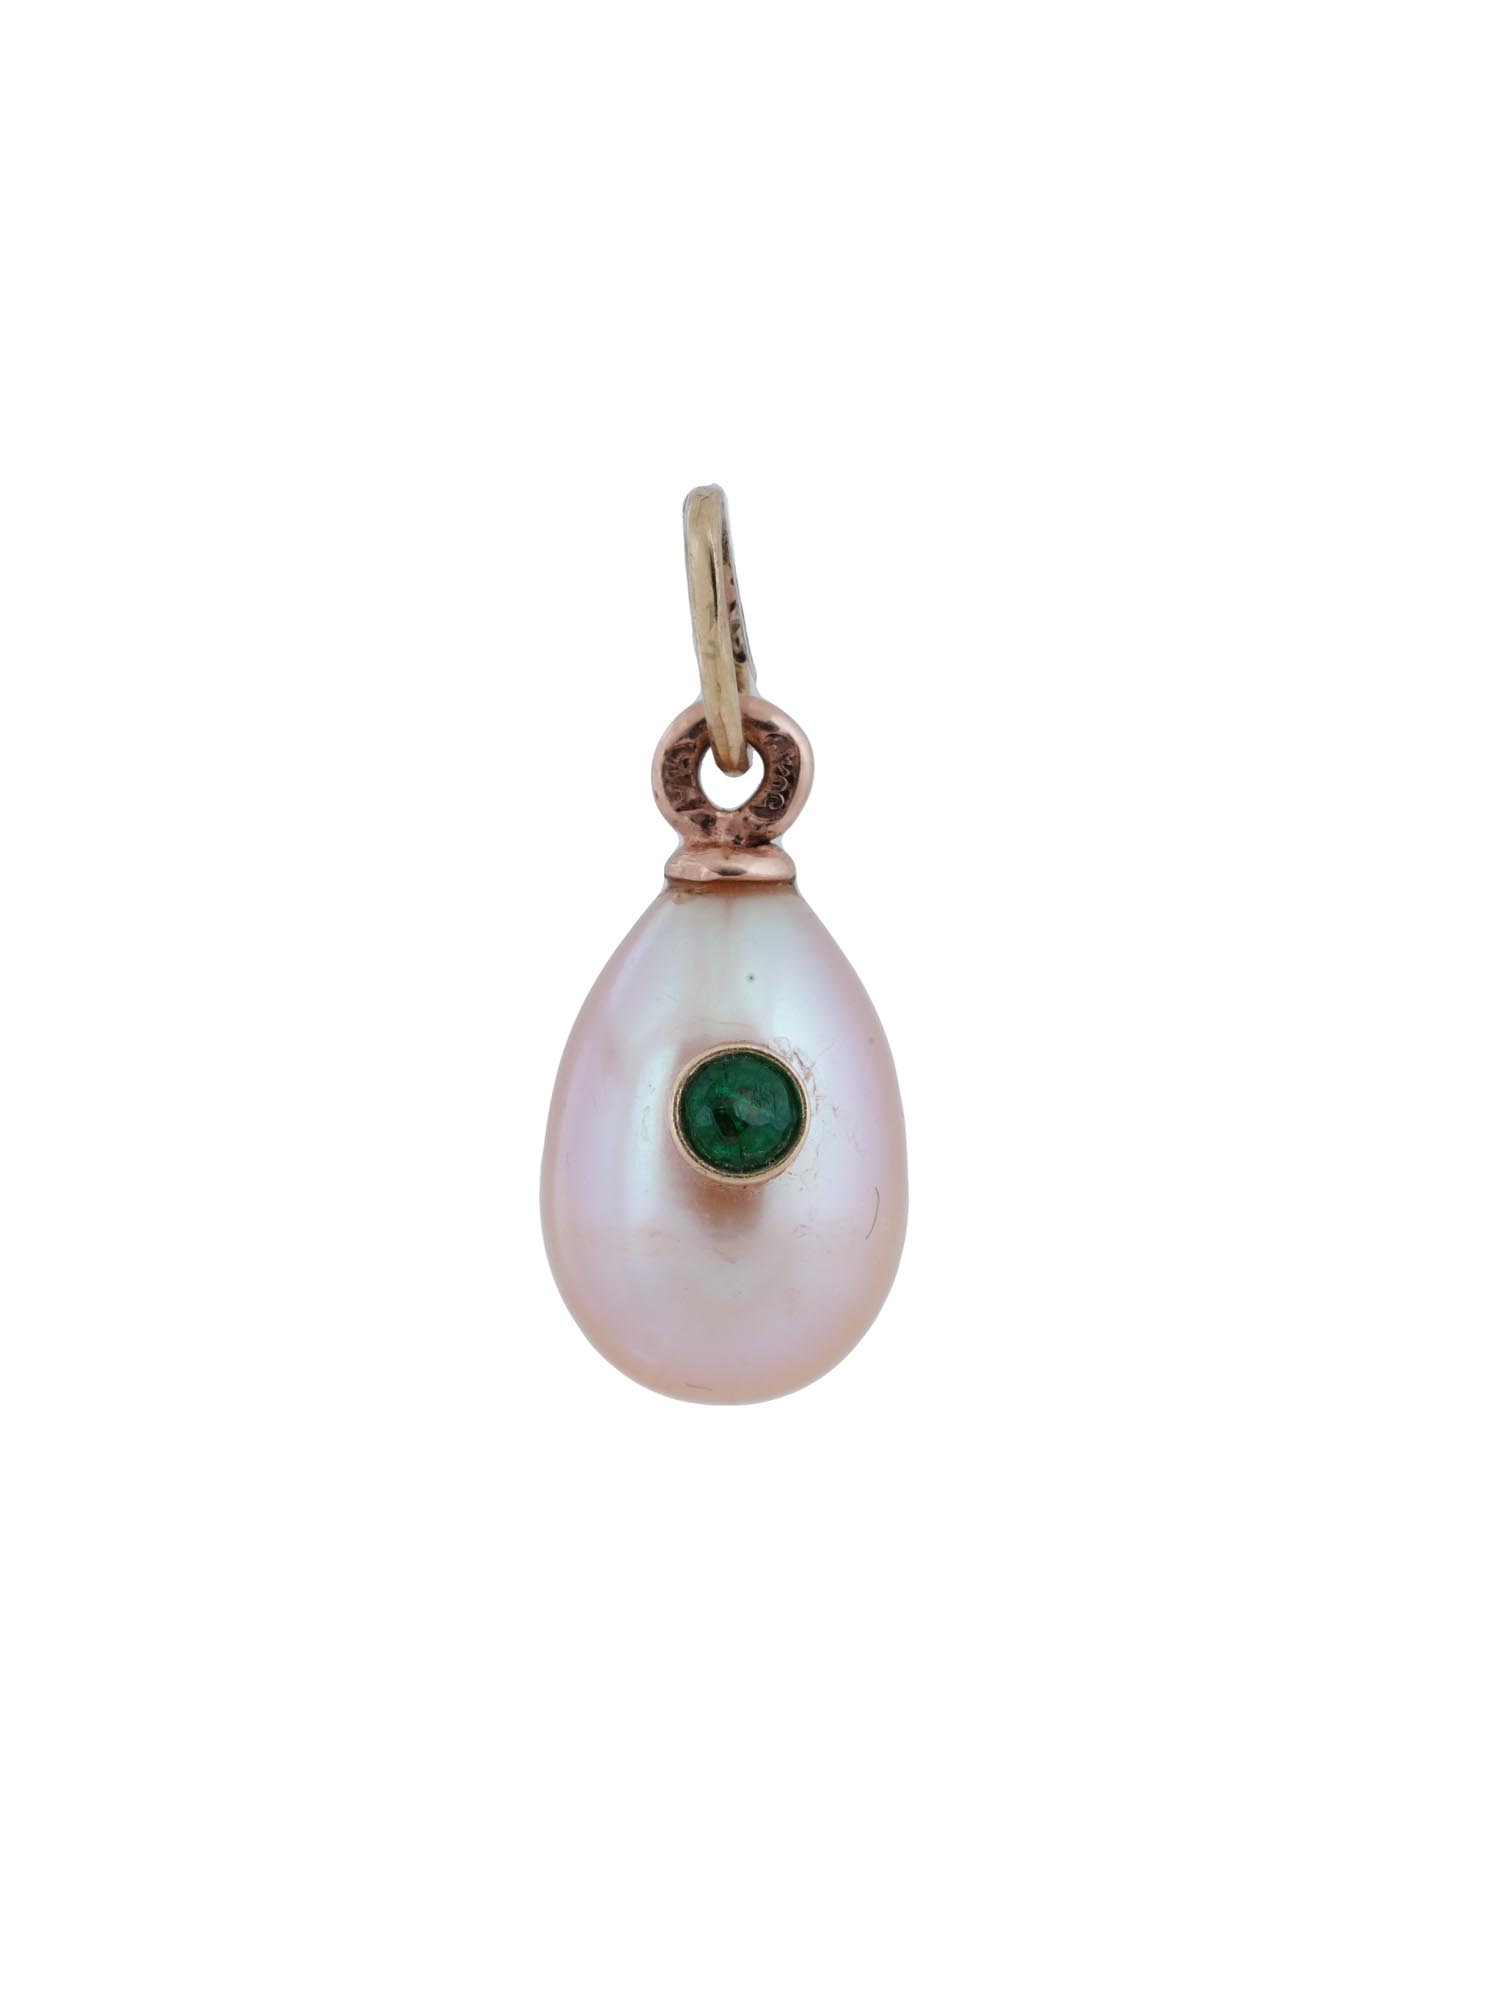 RUSSIAN 14K GOLD PEARL EGG PENDANT WITH EMERALD PIC-0